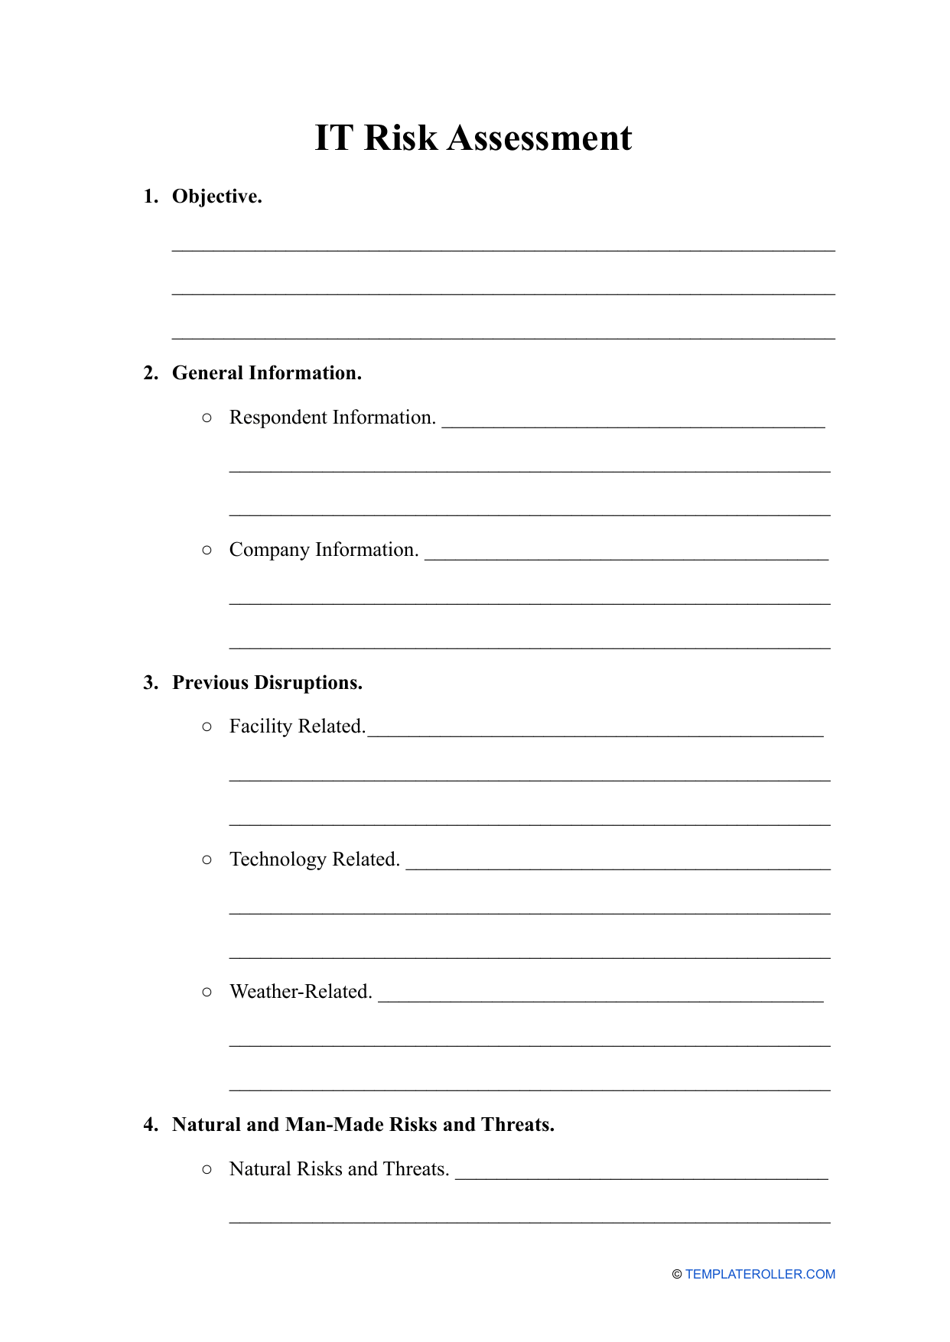 It Risk Assessment Template, Page 1